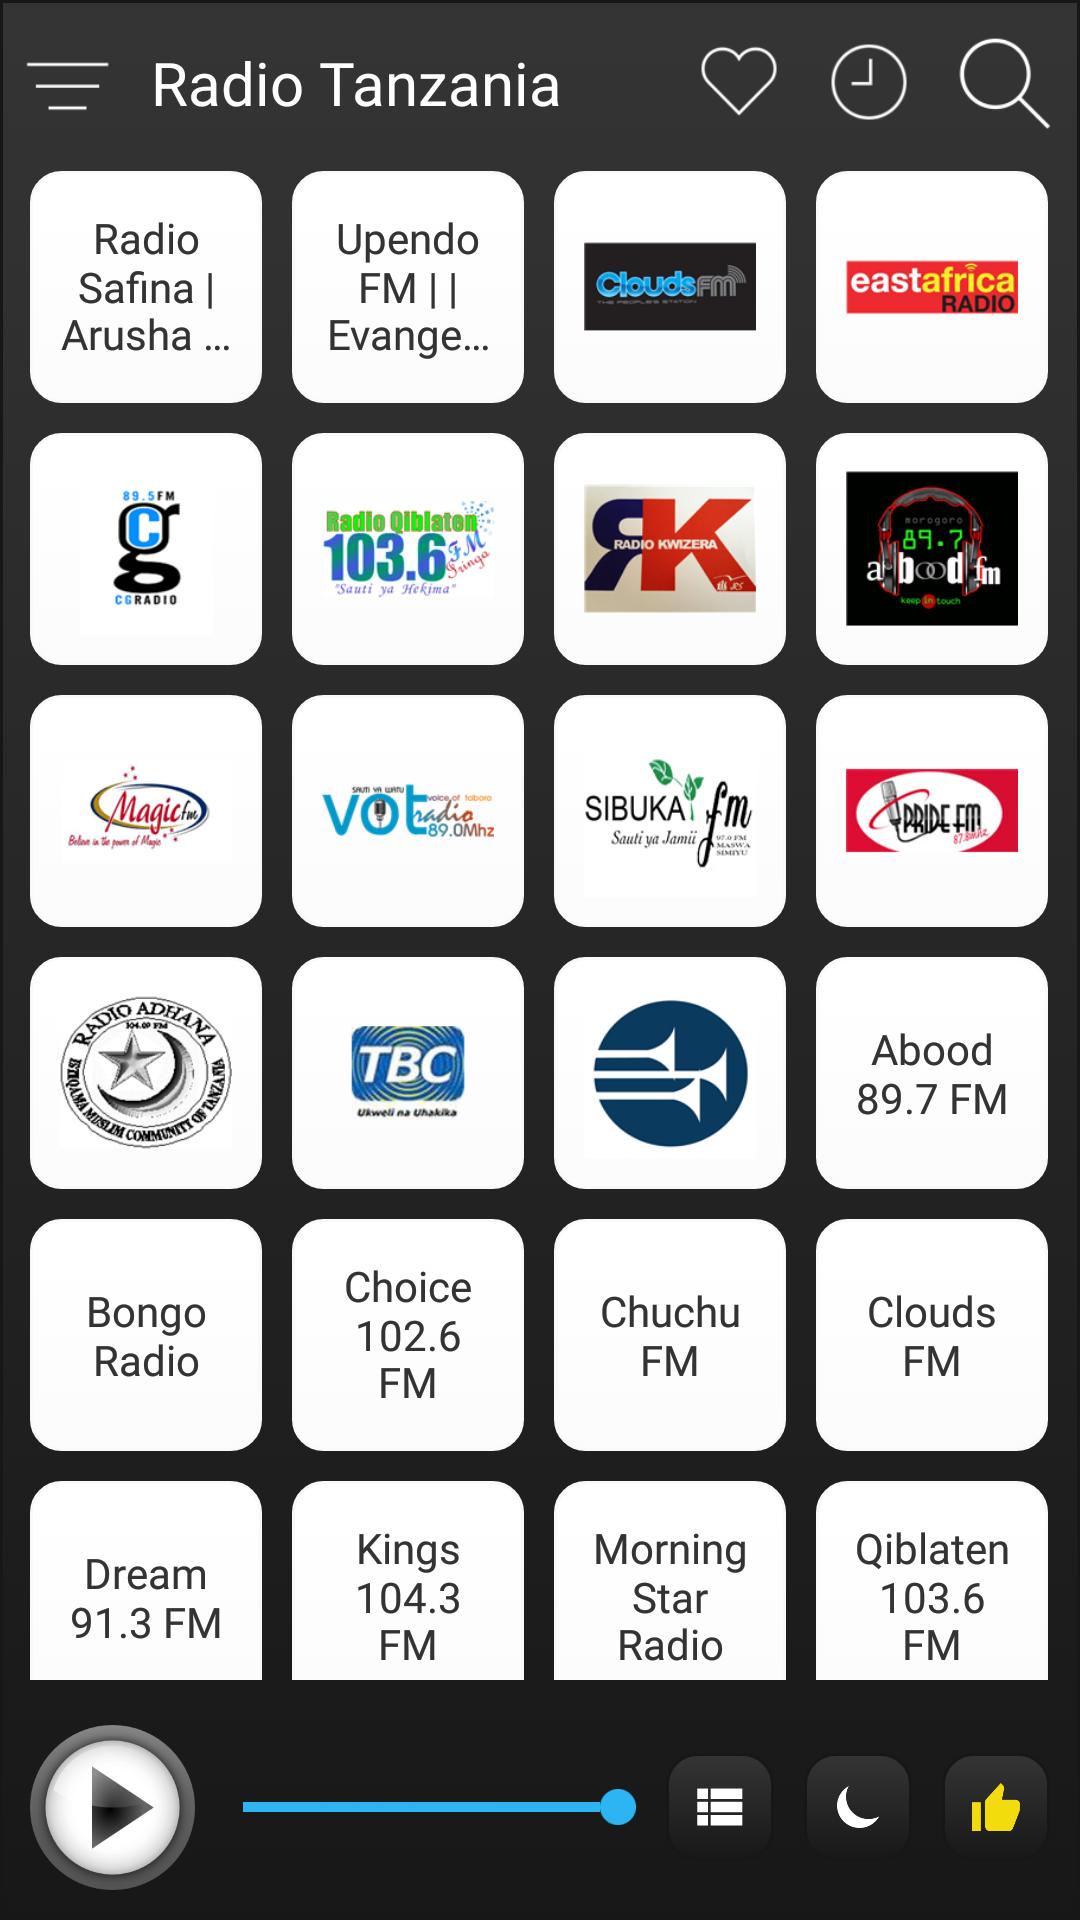 Tanzania Radio Stations Online - Tanzania FM AM for Android - APK Download